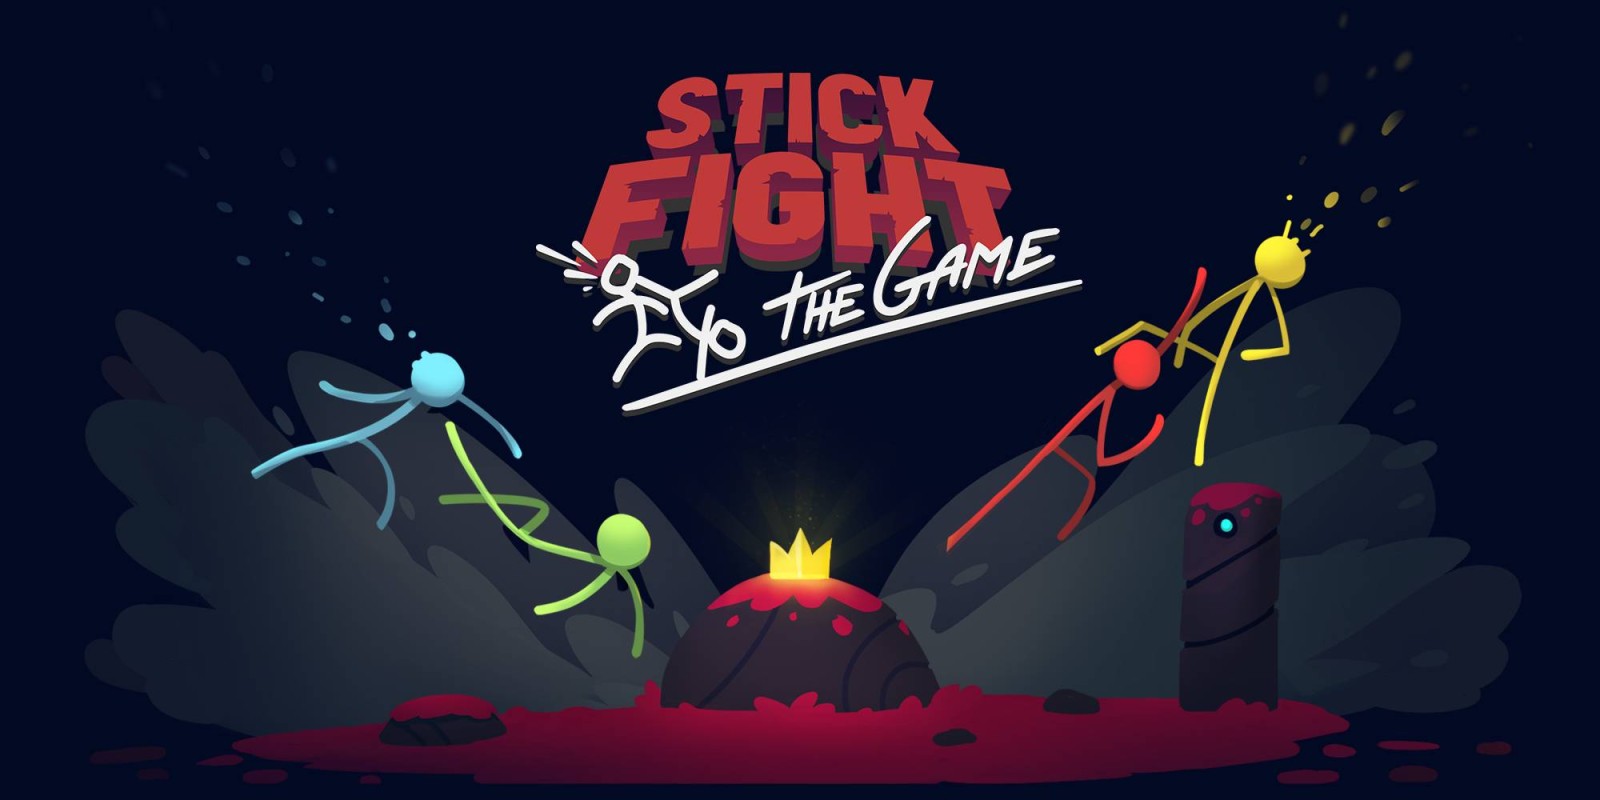 Stick Fight - the Game